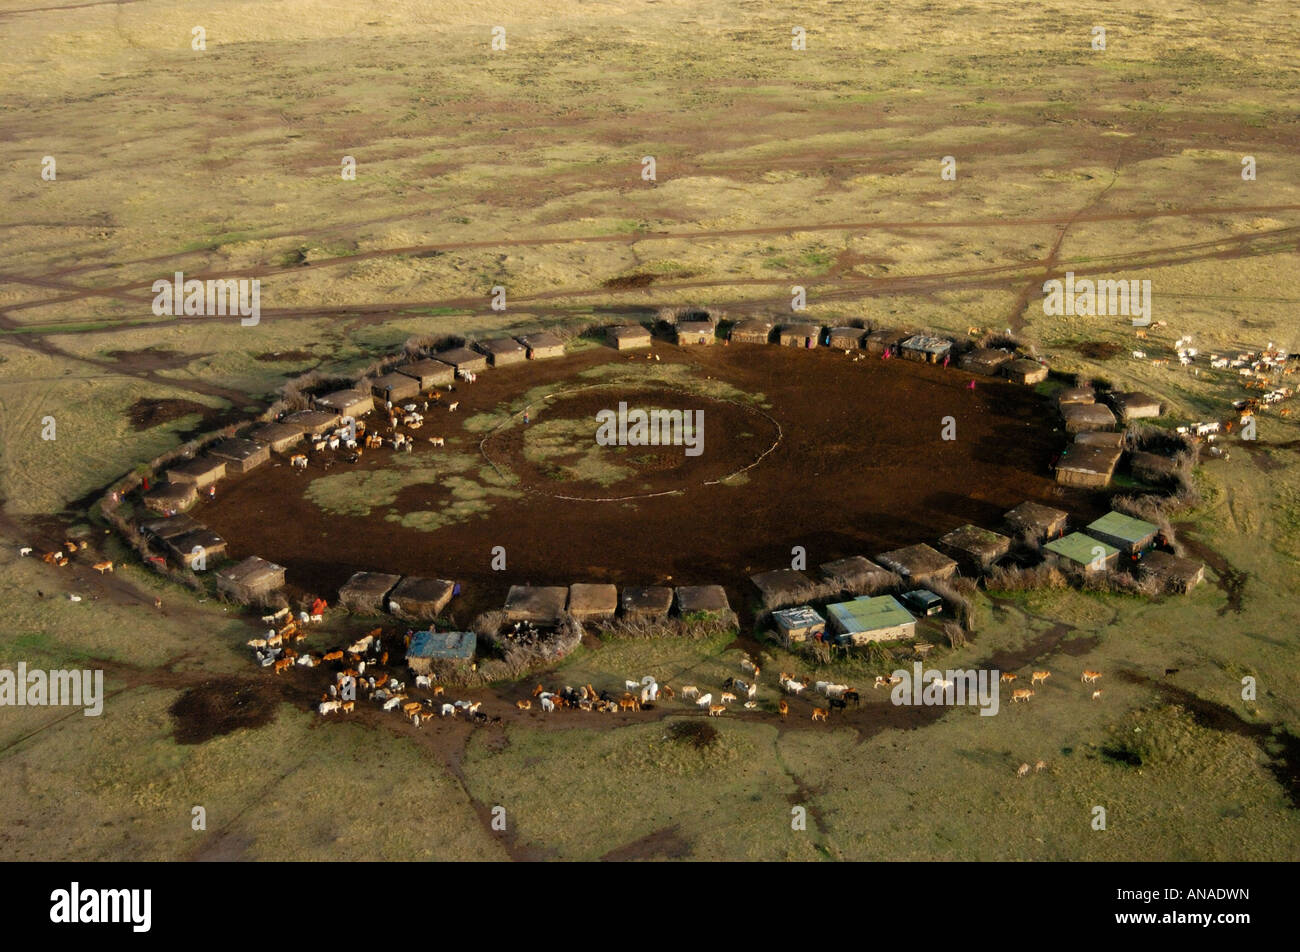 Aerial view of a traditional Maasai manyatta with cattle moving out to grazing pastures Stock Photo